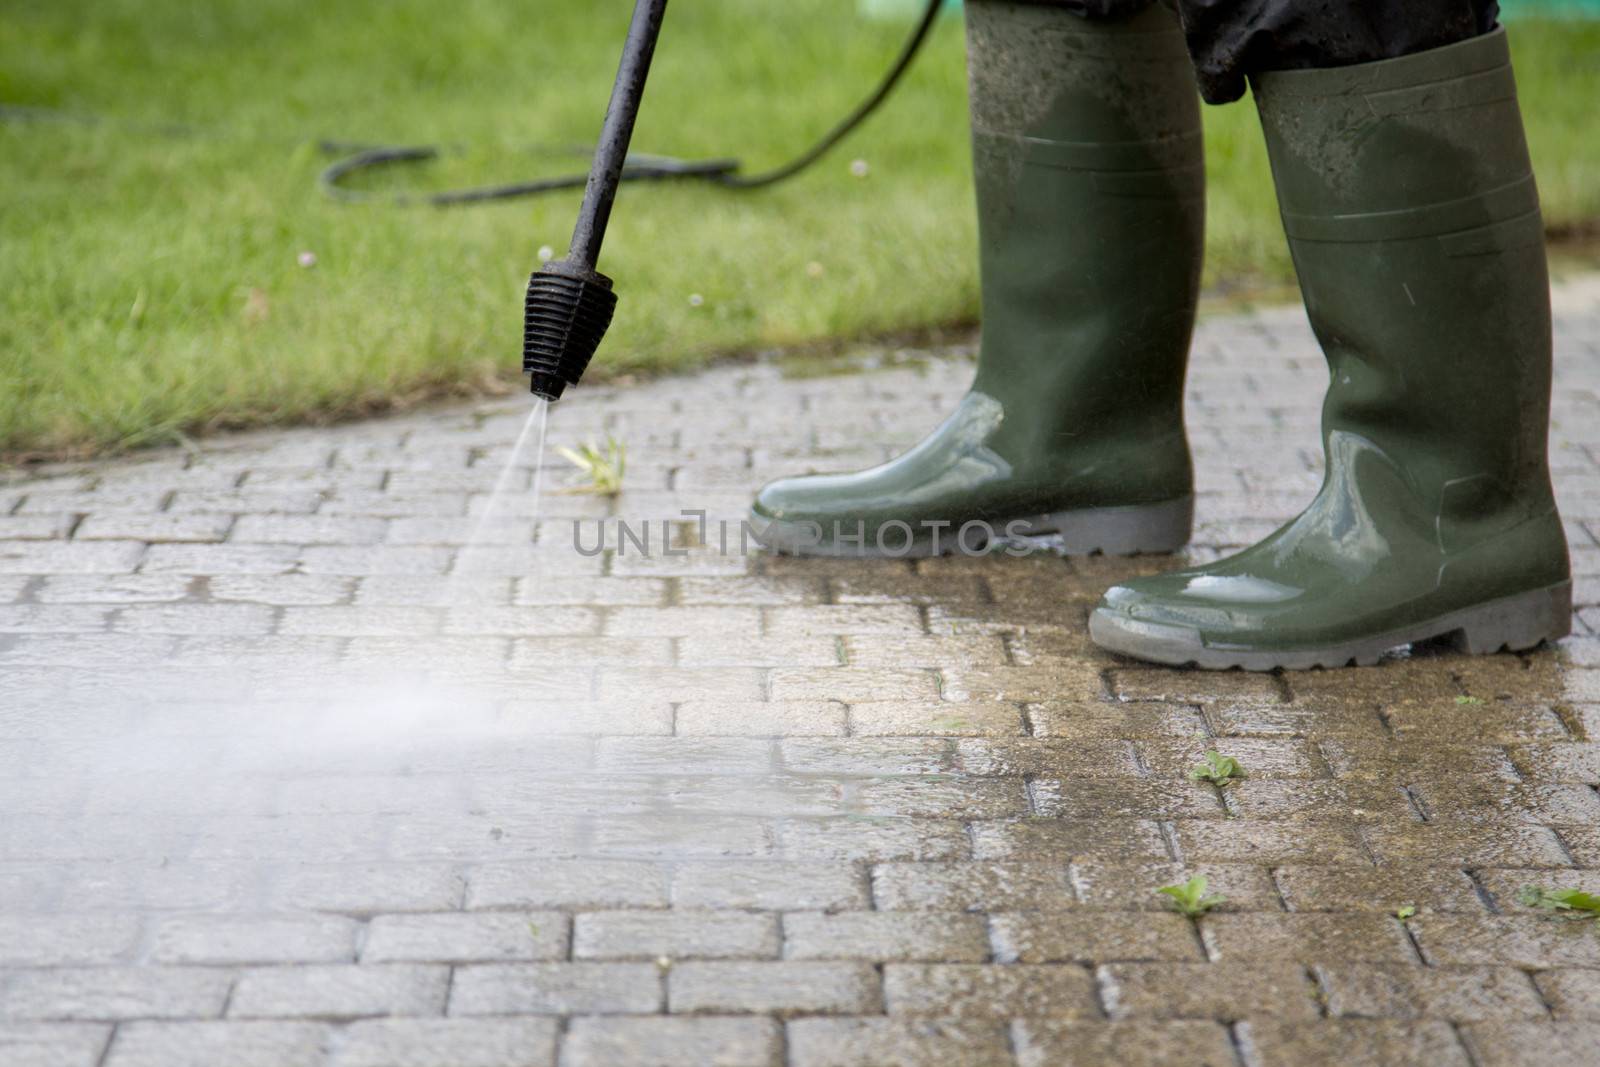 High Pressure Cleaning - 2 by Kartouchken